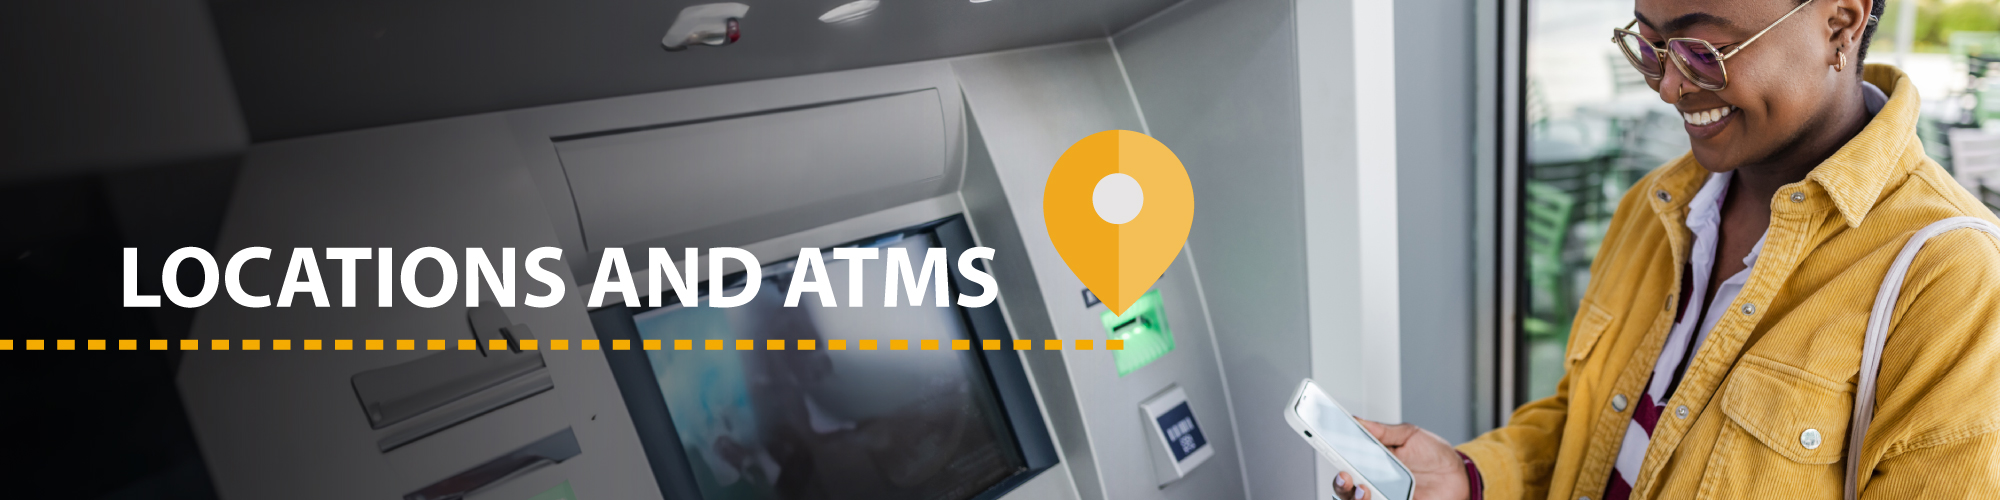 Locations and ATMs